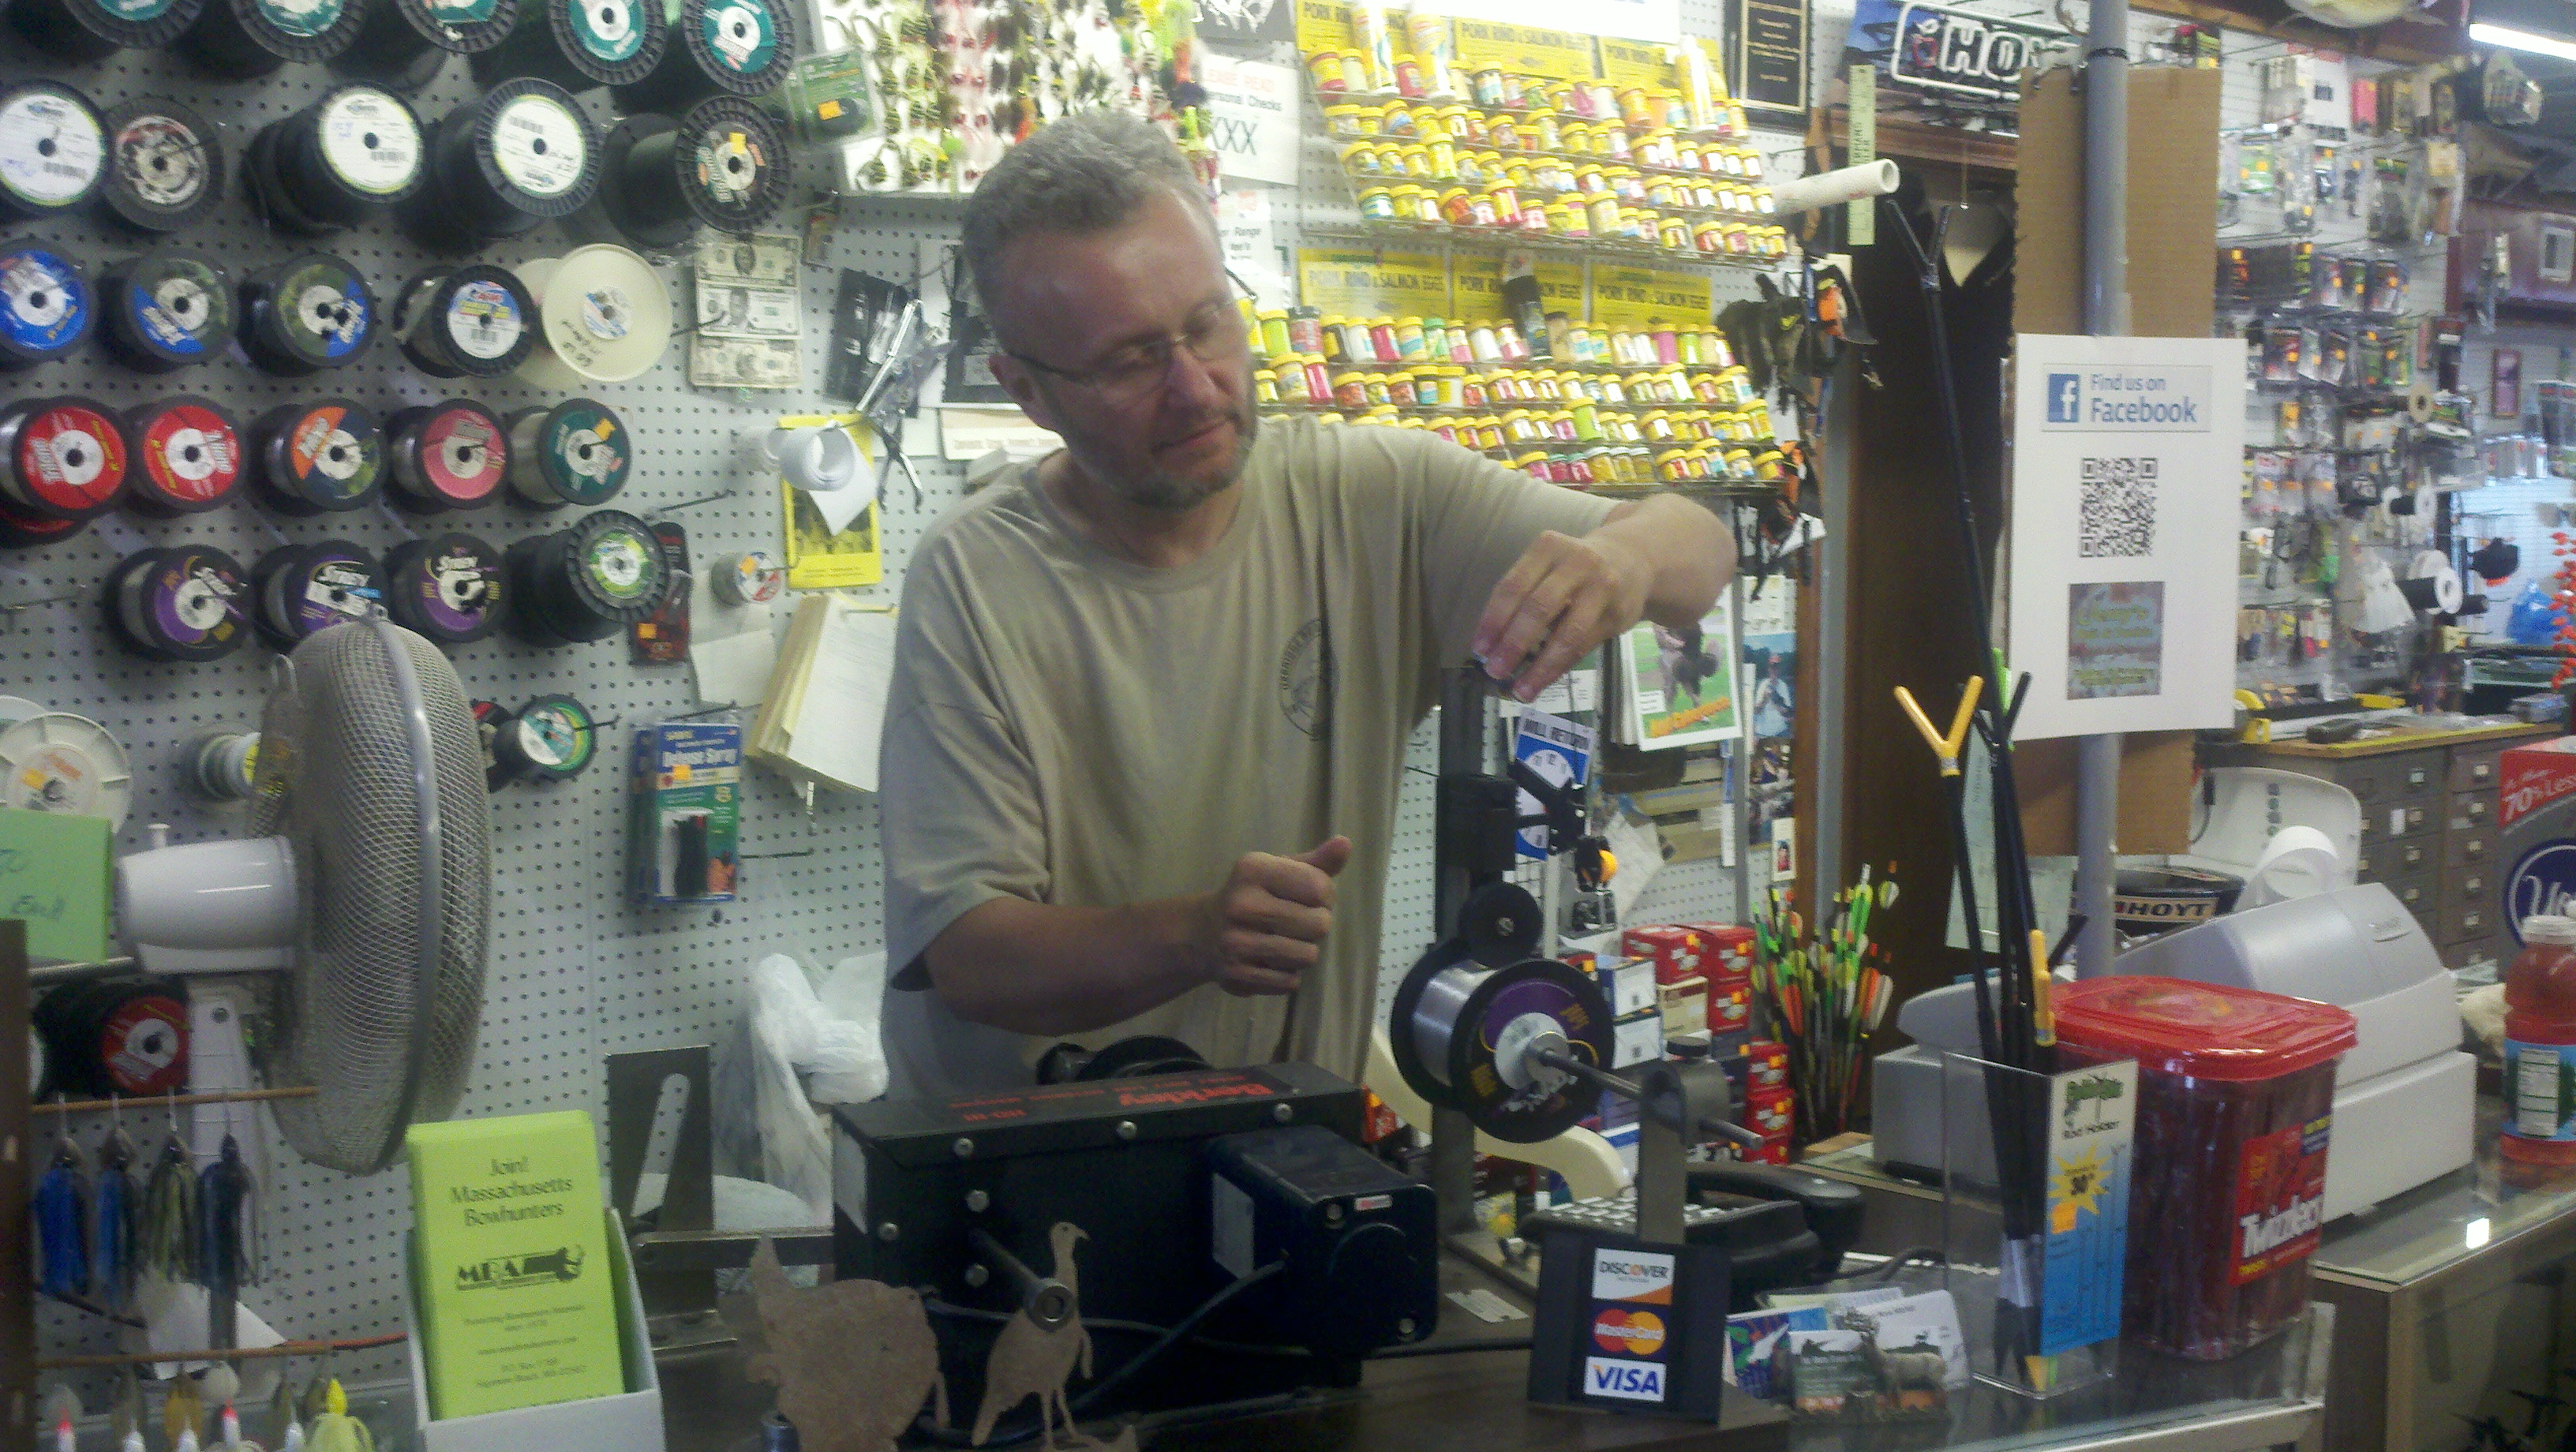 http://jerrysbaitandtackle.com/wp-content/uploads/2012/07/Re-Spooling-with-Fresh-Fishing-Line.jpg